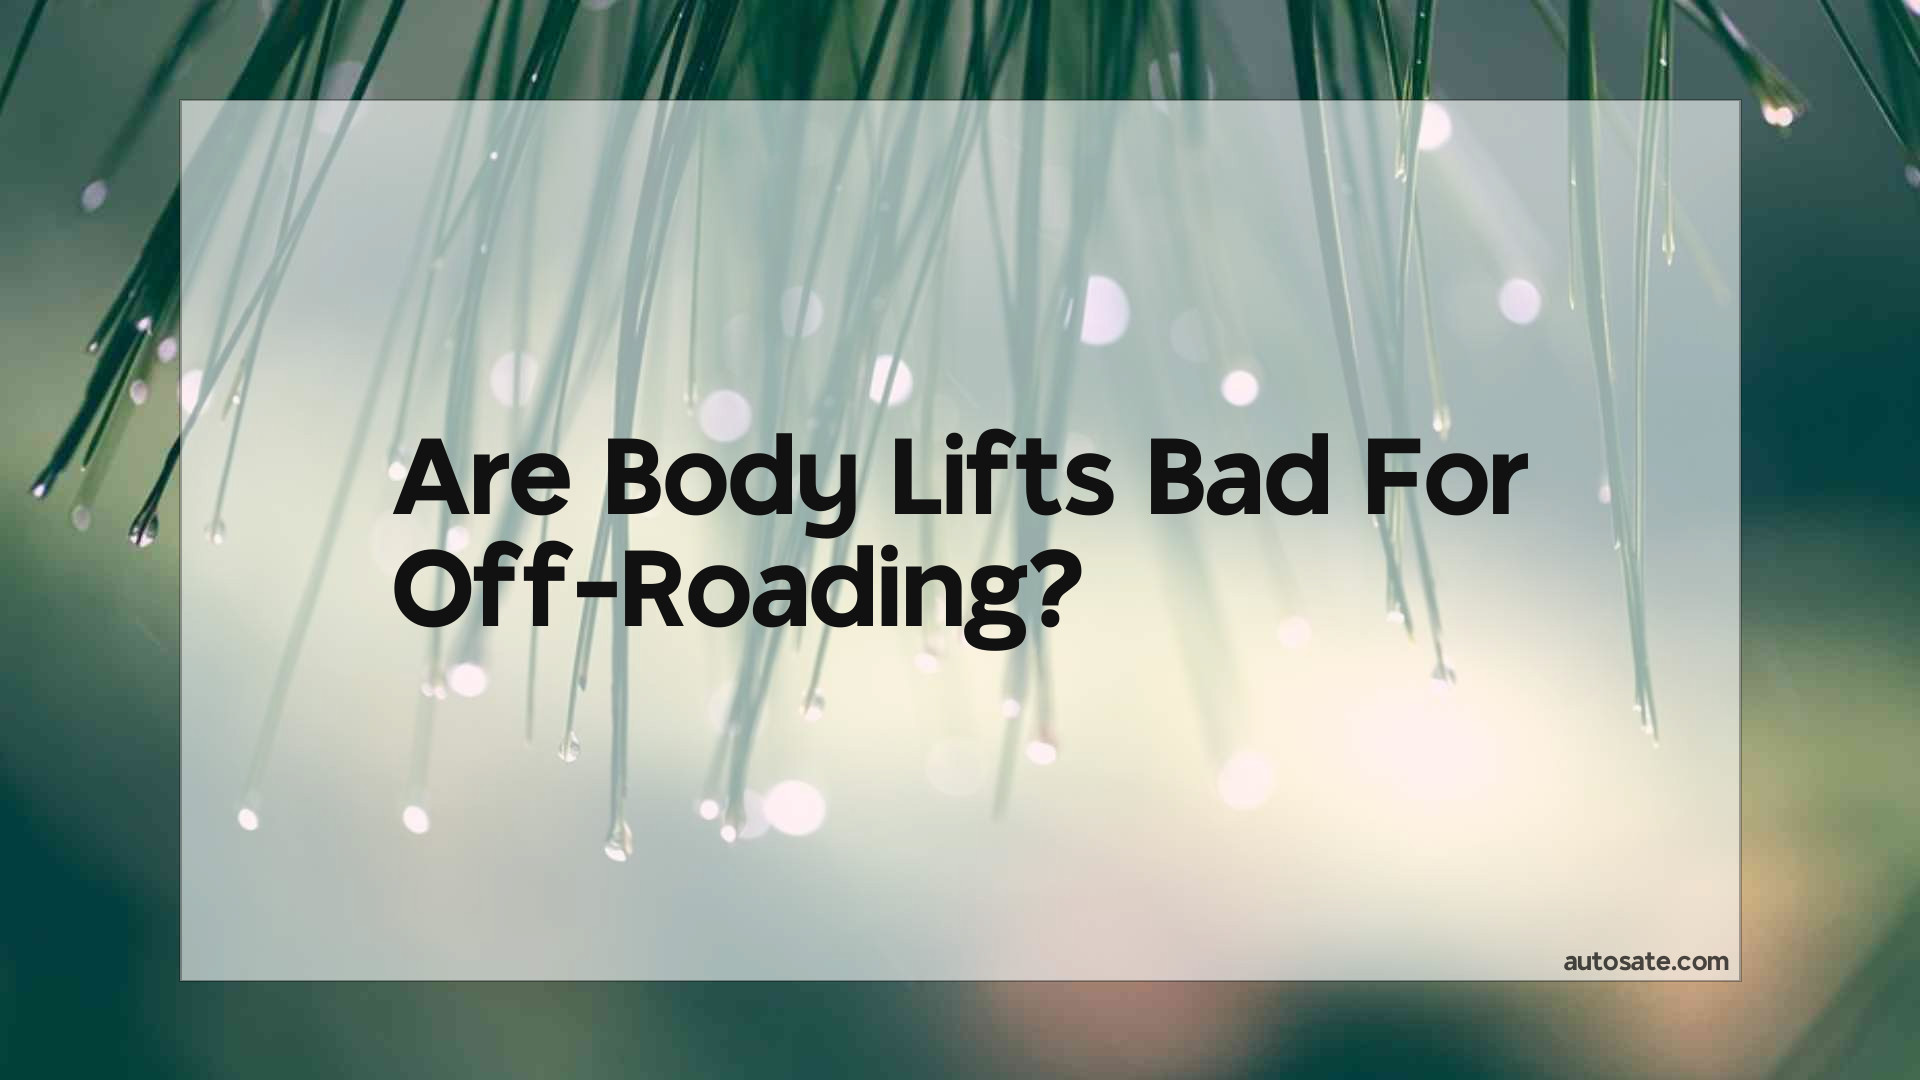 Are Body Lifts Bad For Off-Roading